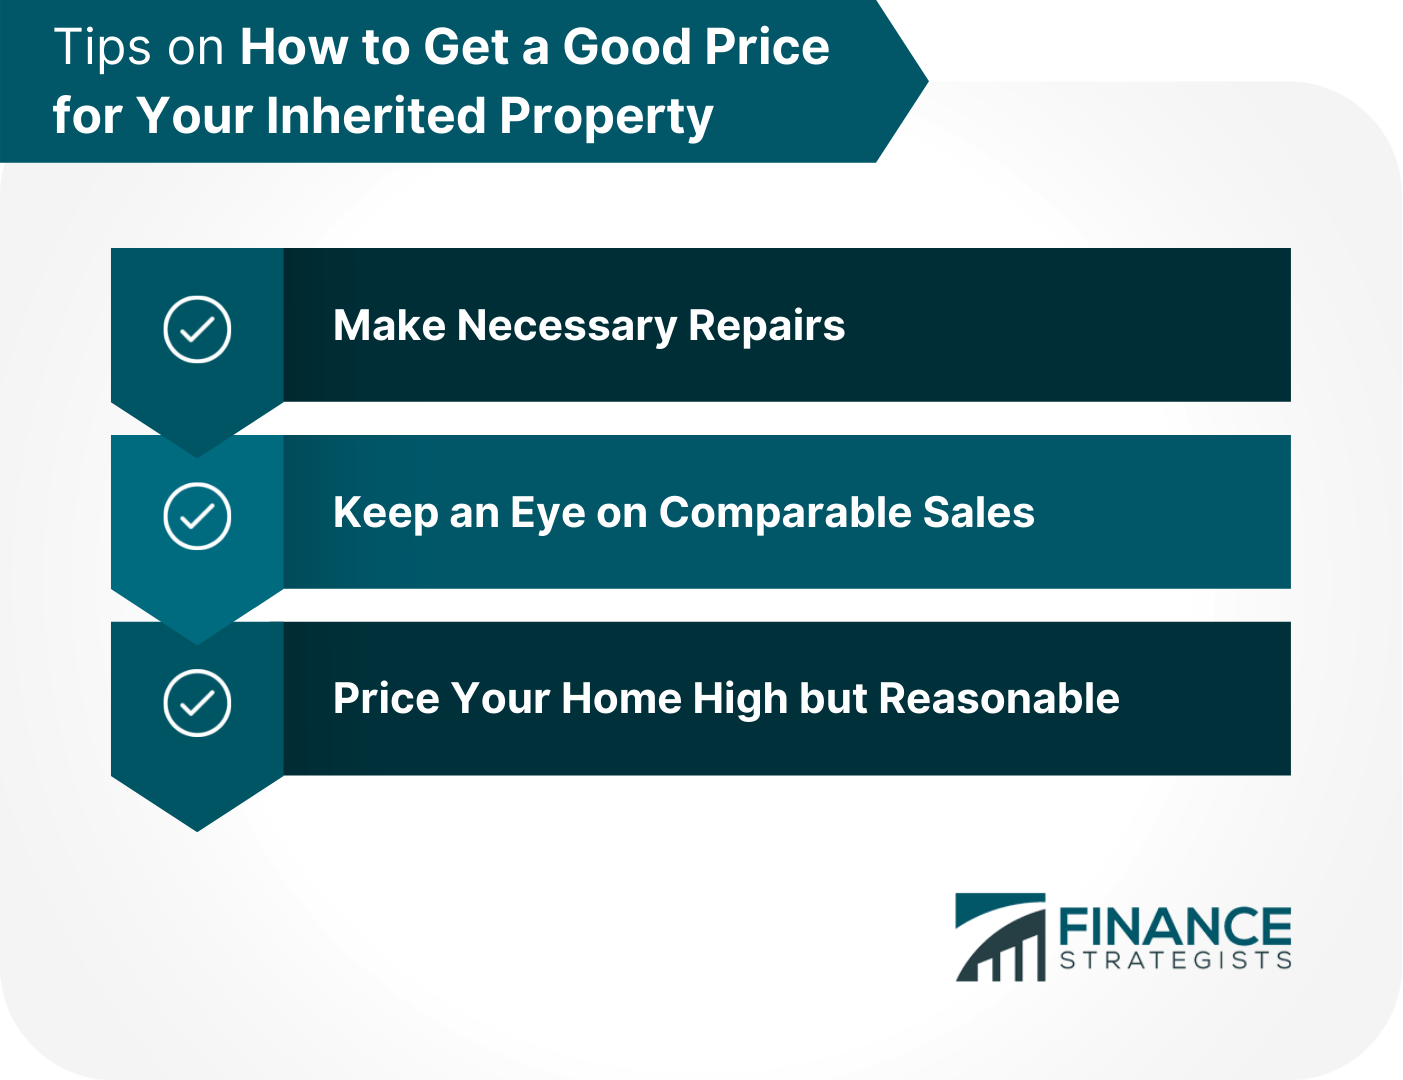 Tips_on_How_to_Get_a_Good_Price_for_Your_Inherited_Property